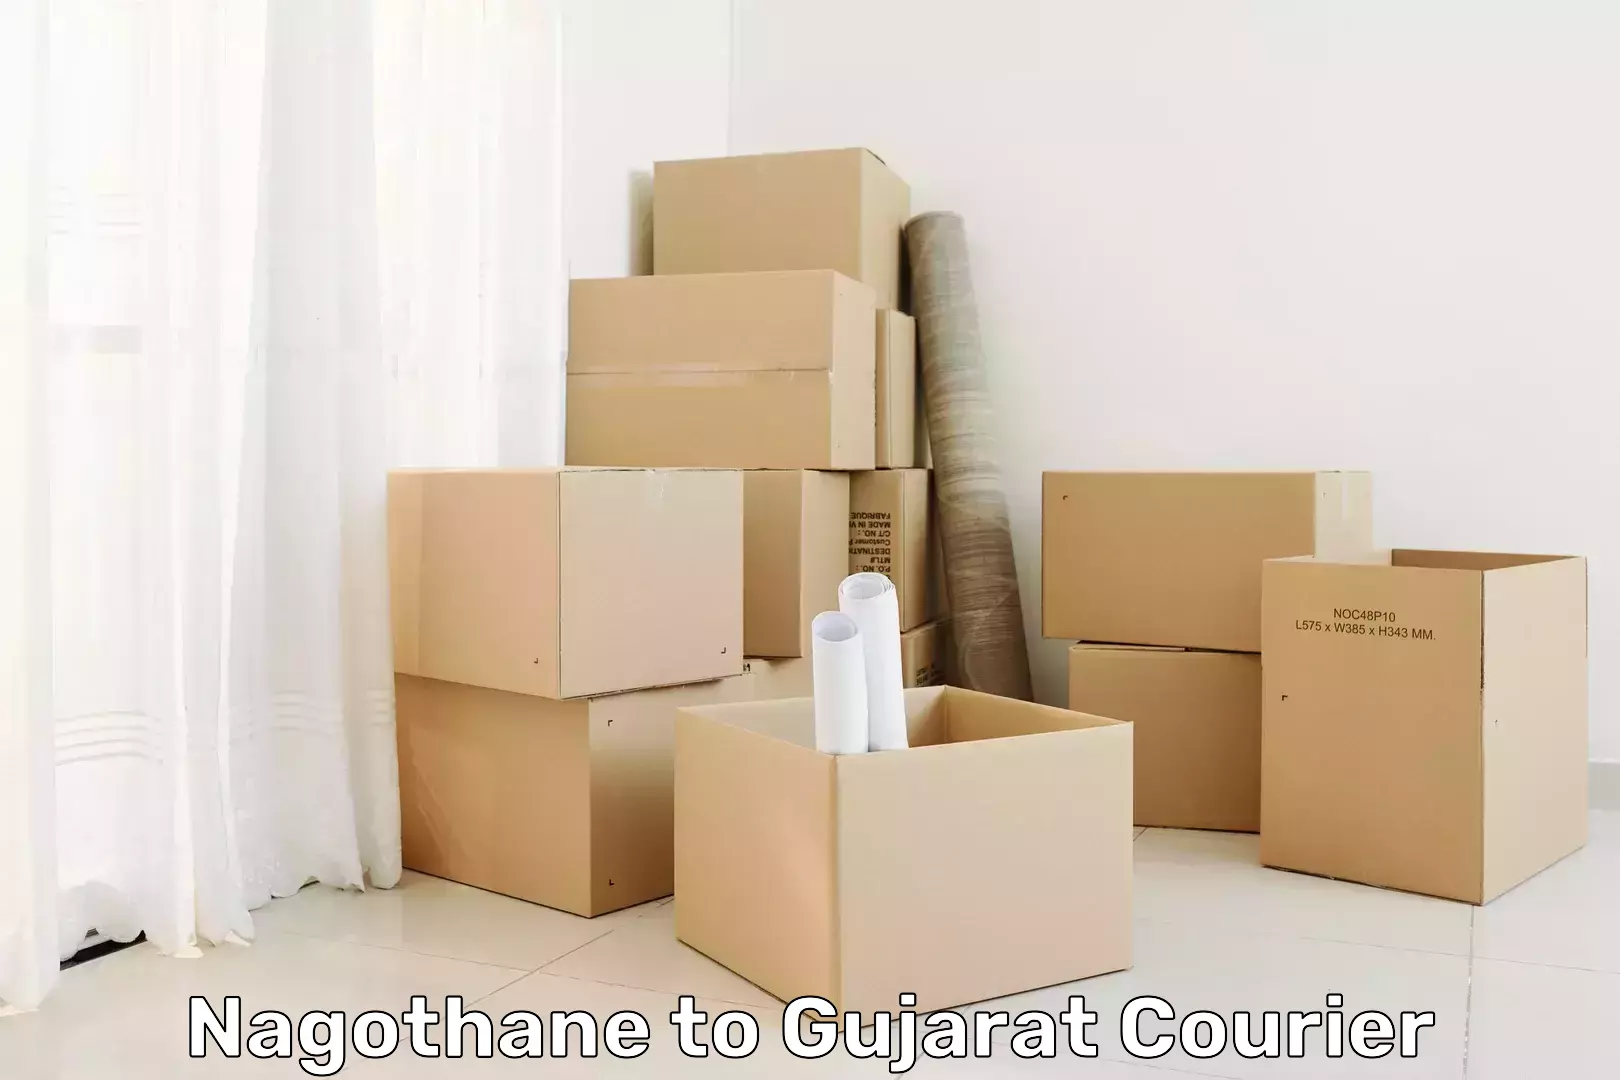 Fast shipping solutions Nagothane to Gujarat